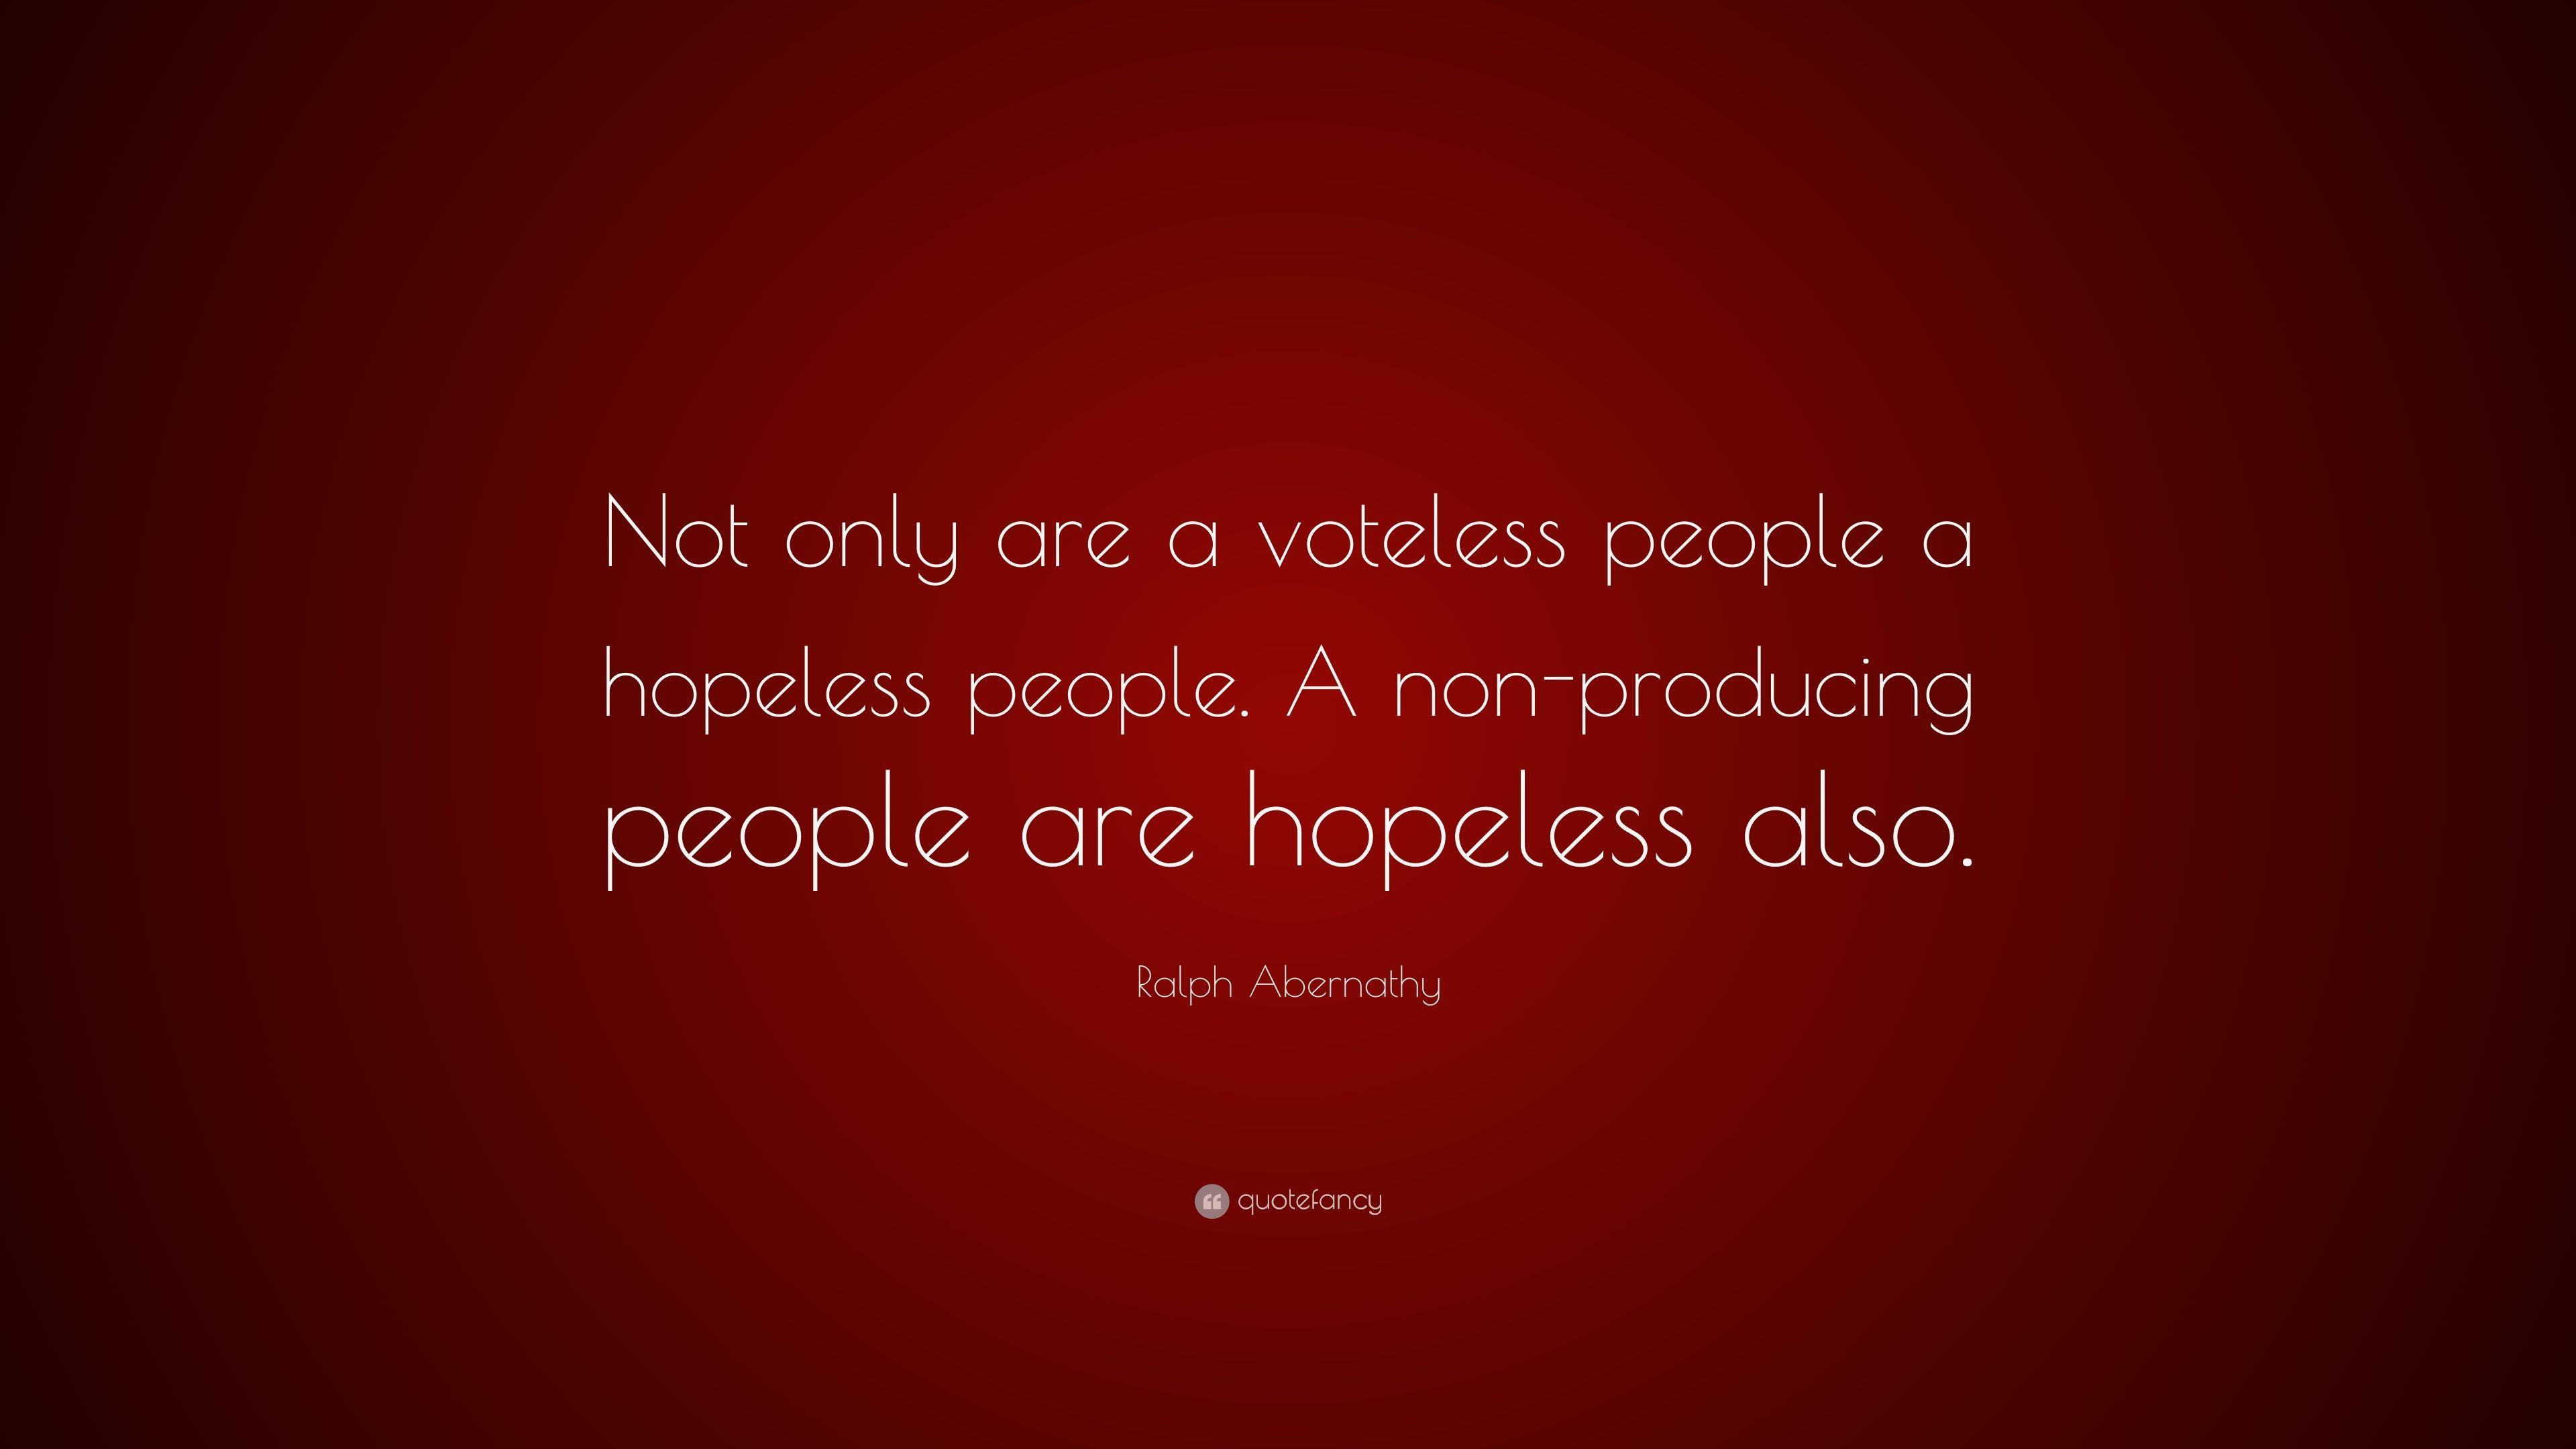 Ralph Abernathy Quote: “Not only are a voteless people a hopeless